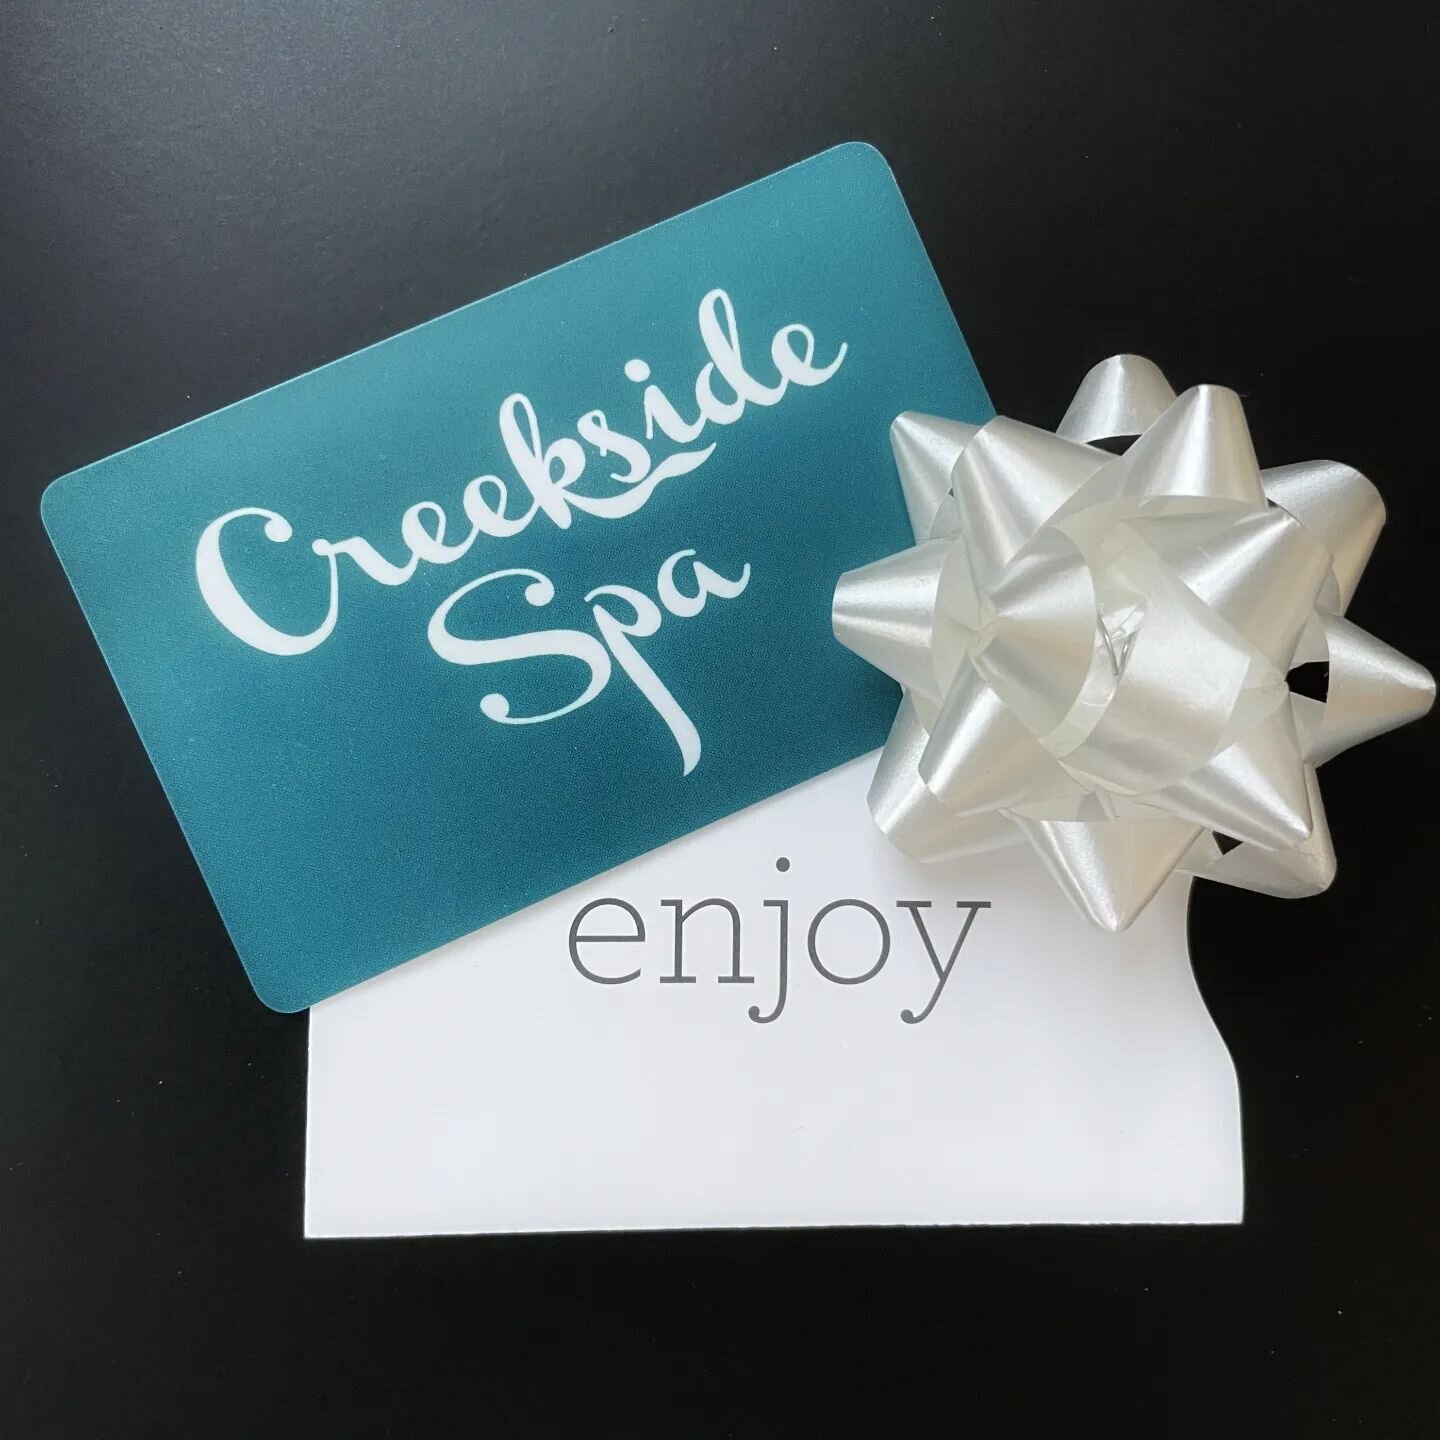 Looking for last minute gift ideas? Treat that special someone to a gift certificate from Creekside Spa!

You can purchase a digital certificate online or come in for a gift card. 

We look forward to seeing you!